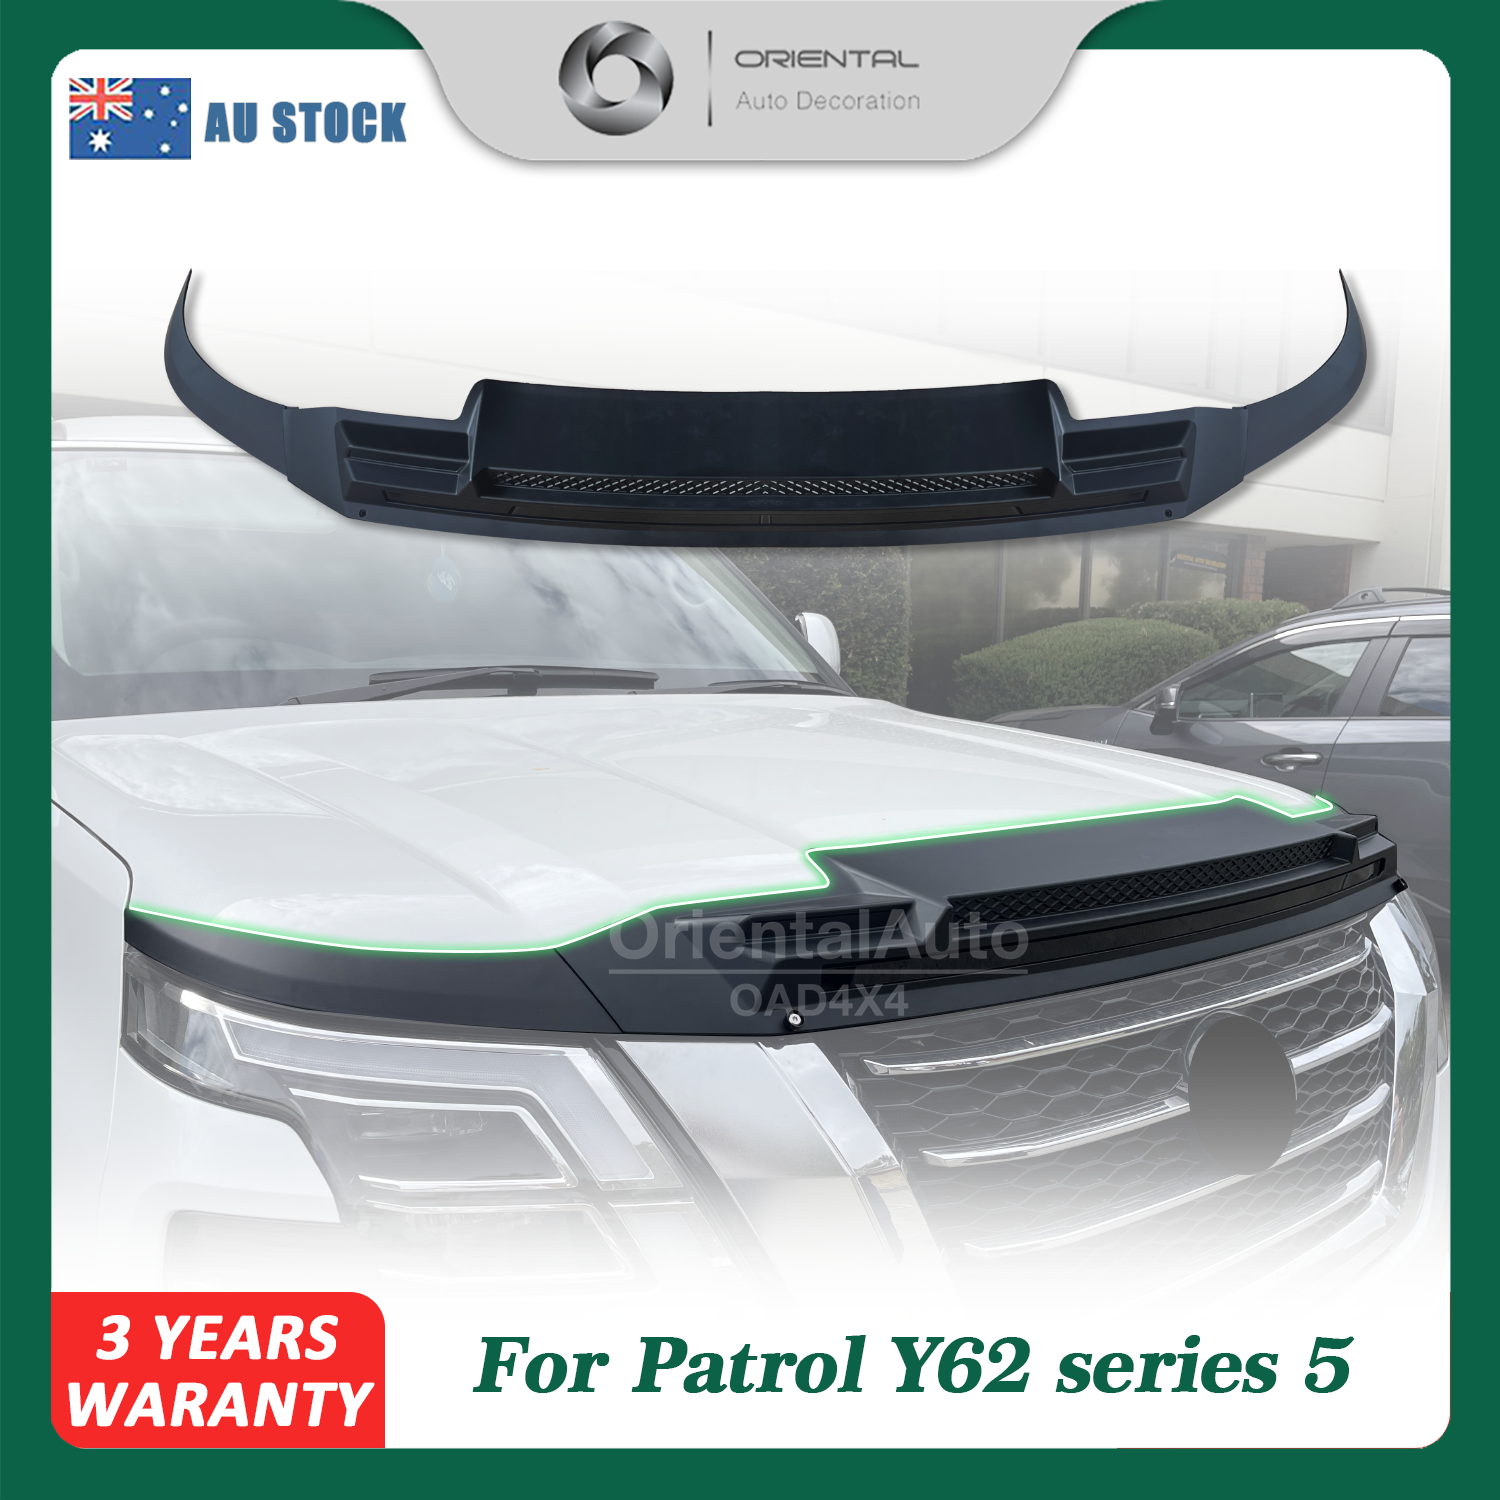 Injection Modeling Exclusive Bonnet Protector for Nissan Patrol Y62 Se –  Oriental Auto (OAD4X4)